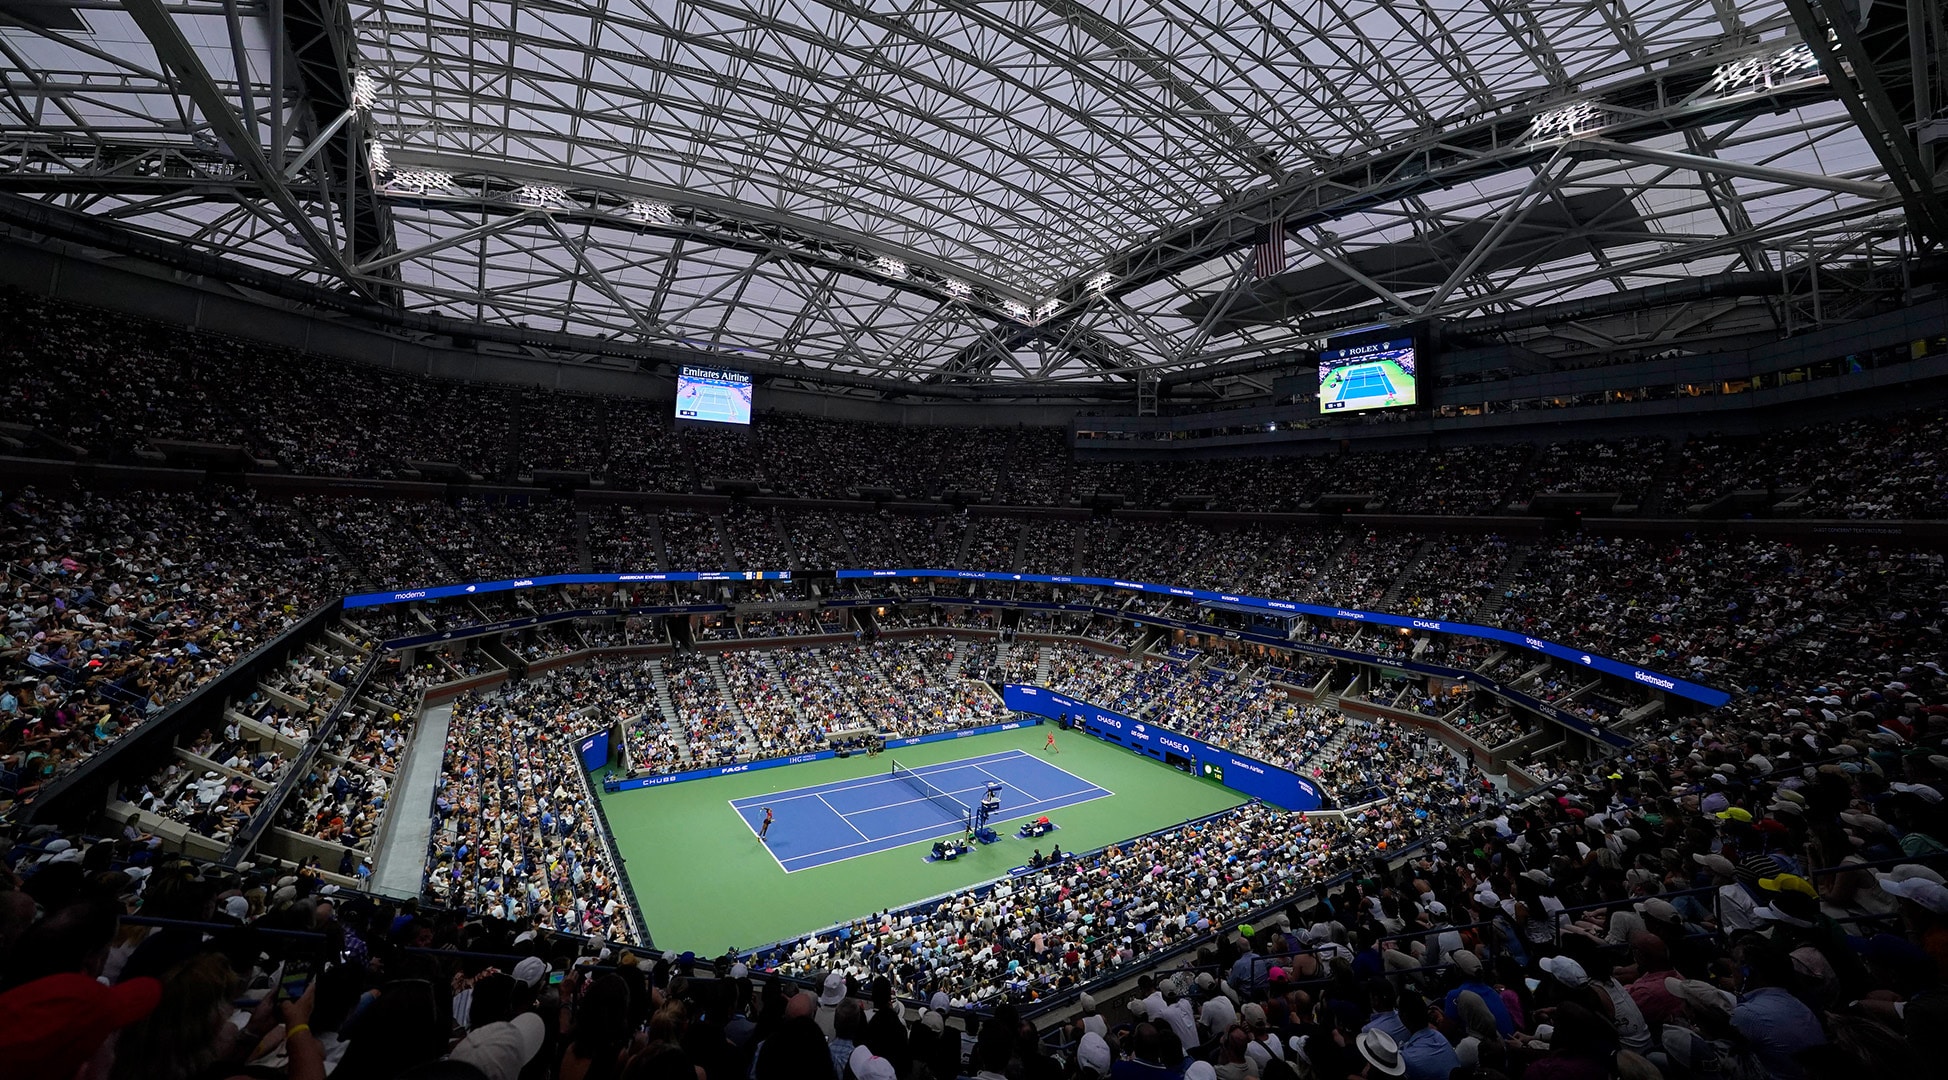 Tennis stadium filled with fans.